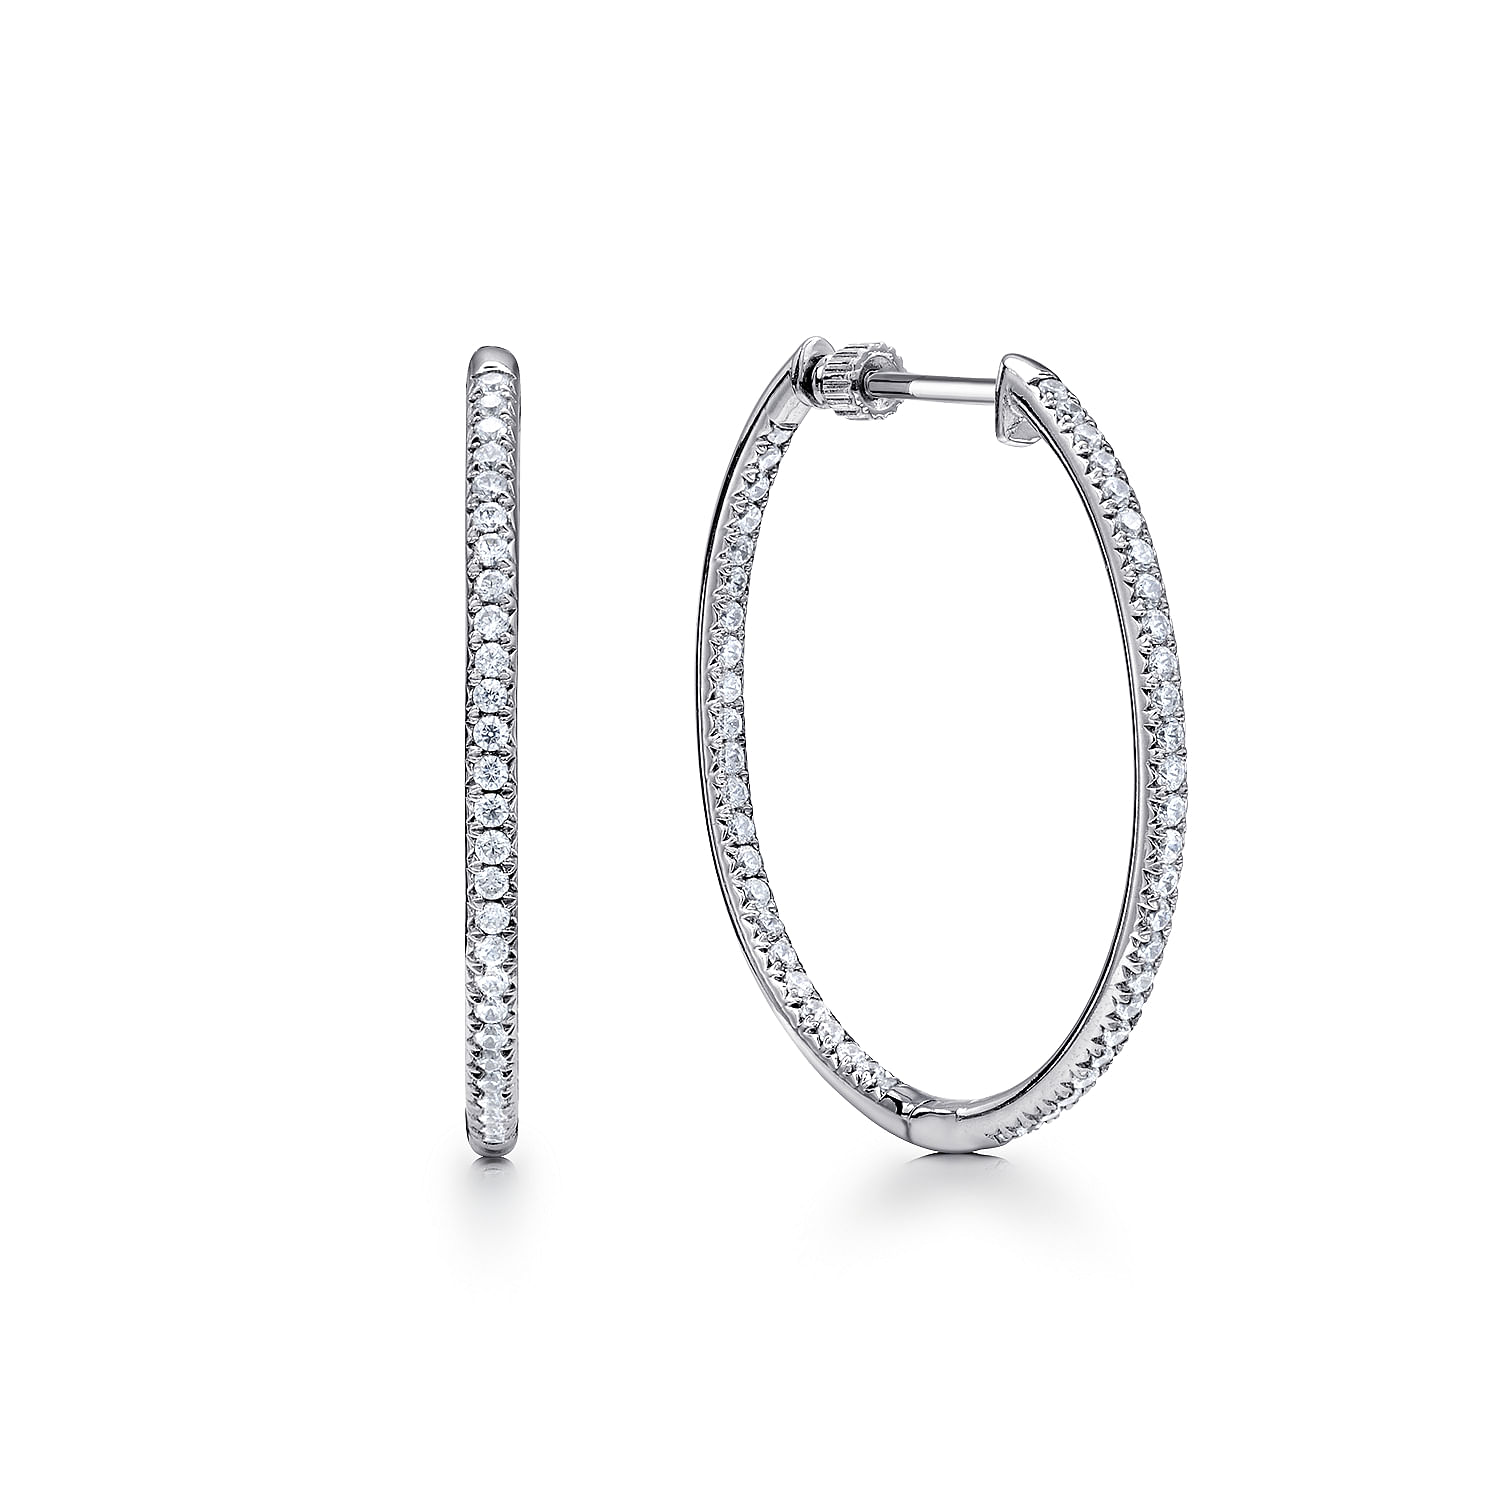 14K White Gold Micro Pave 30mm Round Inside Out Diamond Hoop Earrings